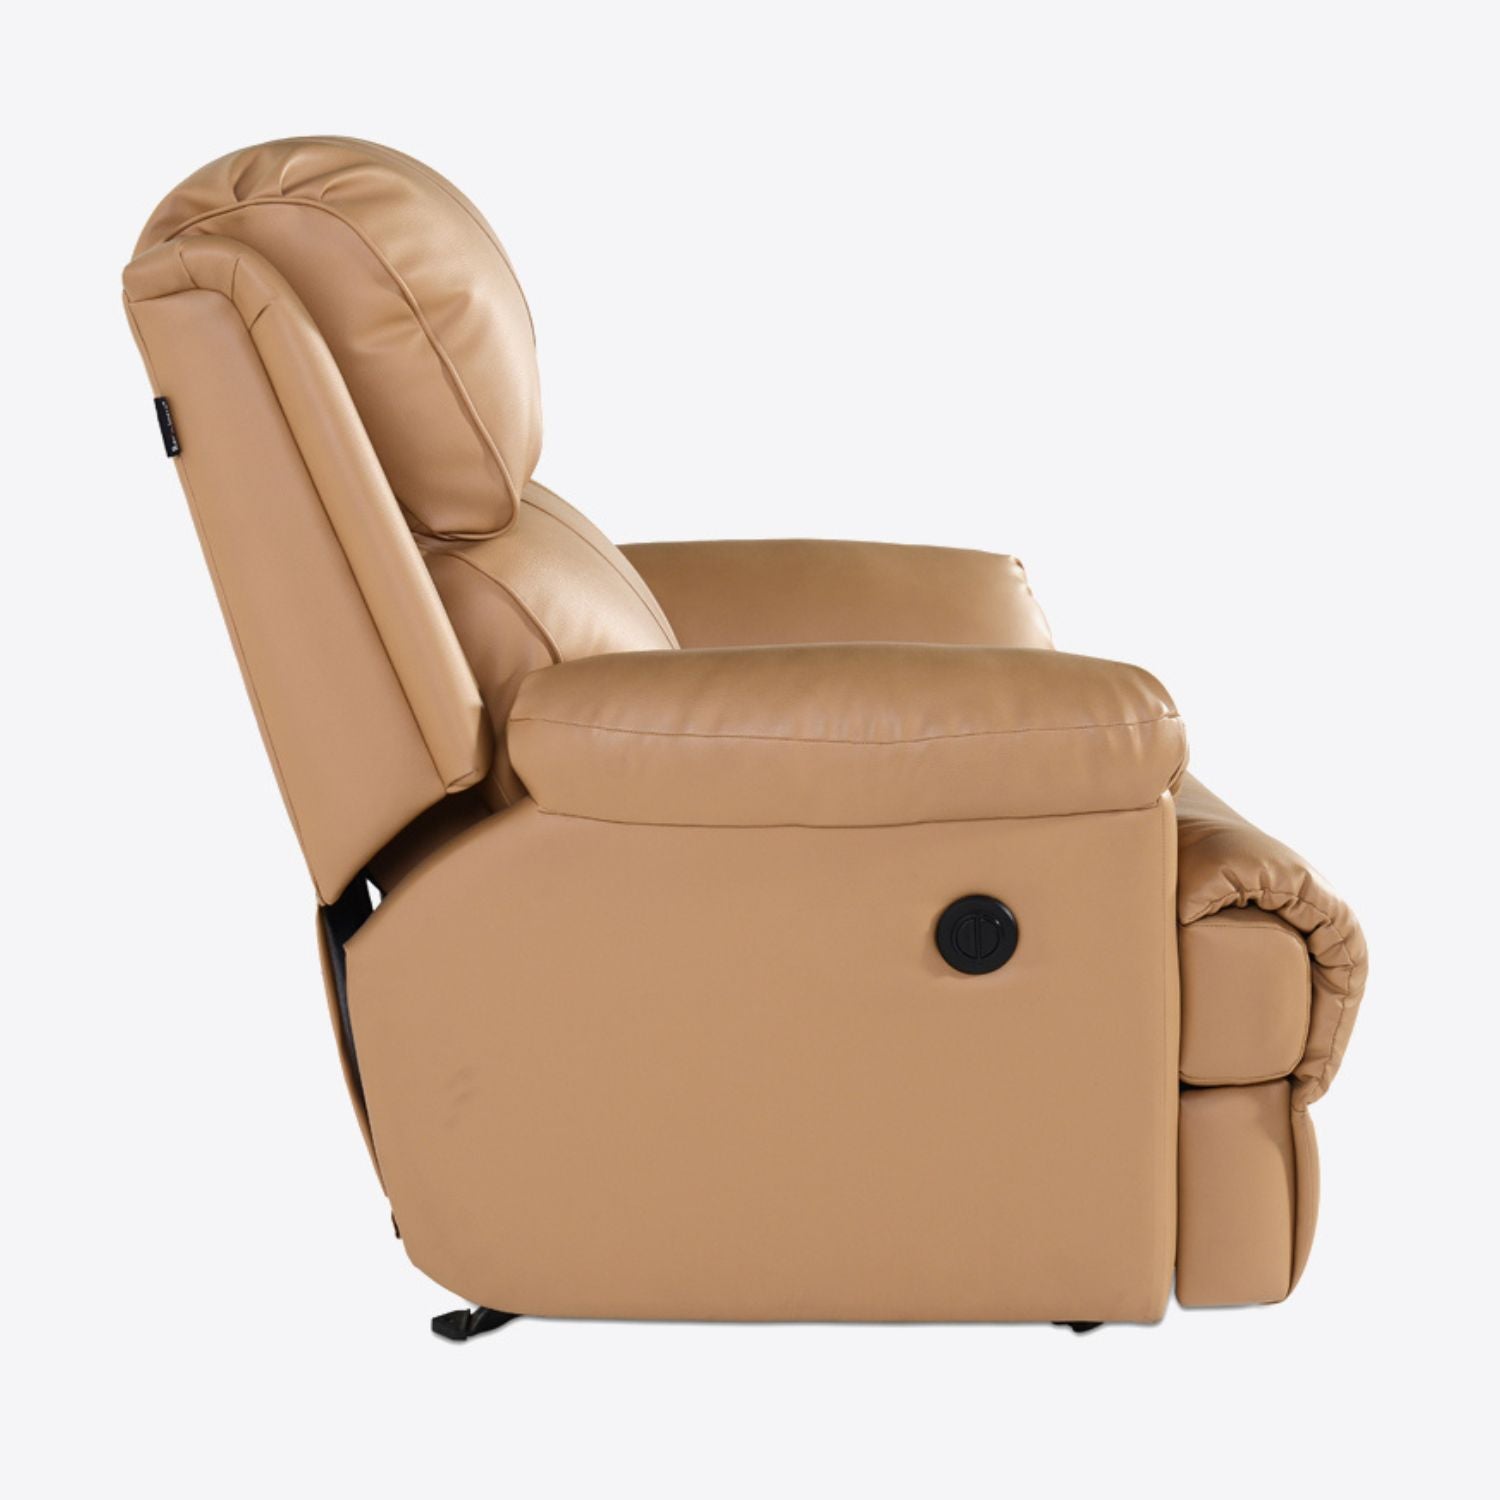 765/369 RECLINER CHAIR MANUAL Recliners India